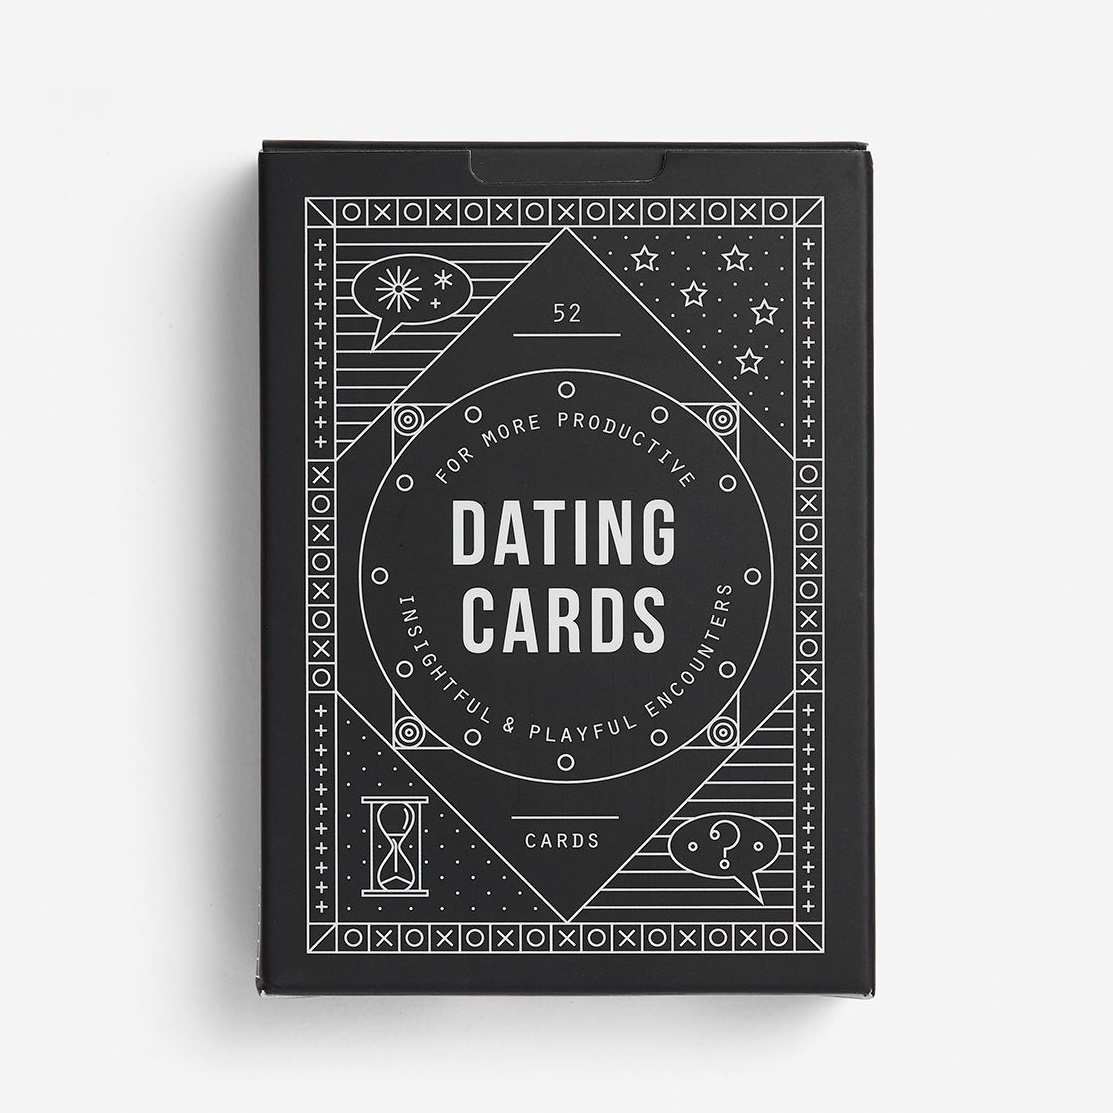 Dating cards